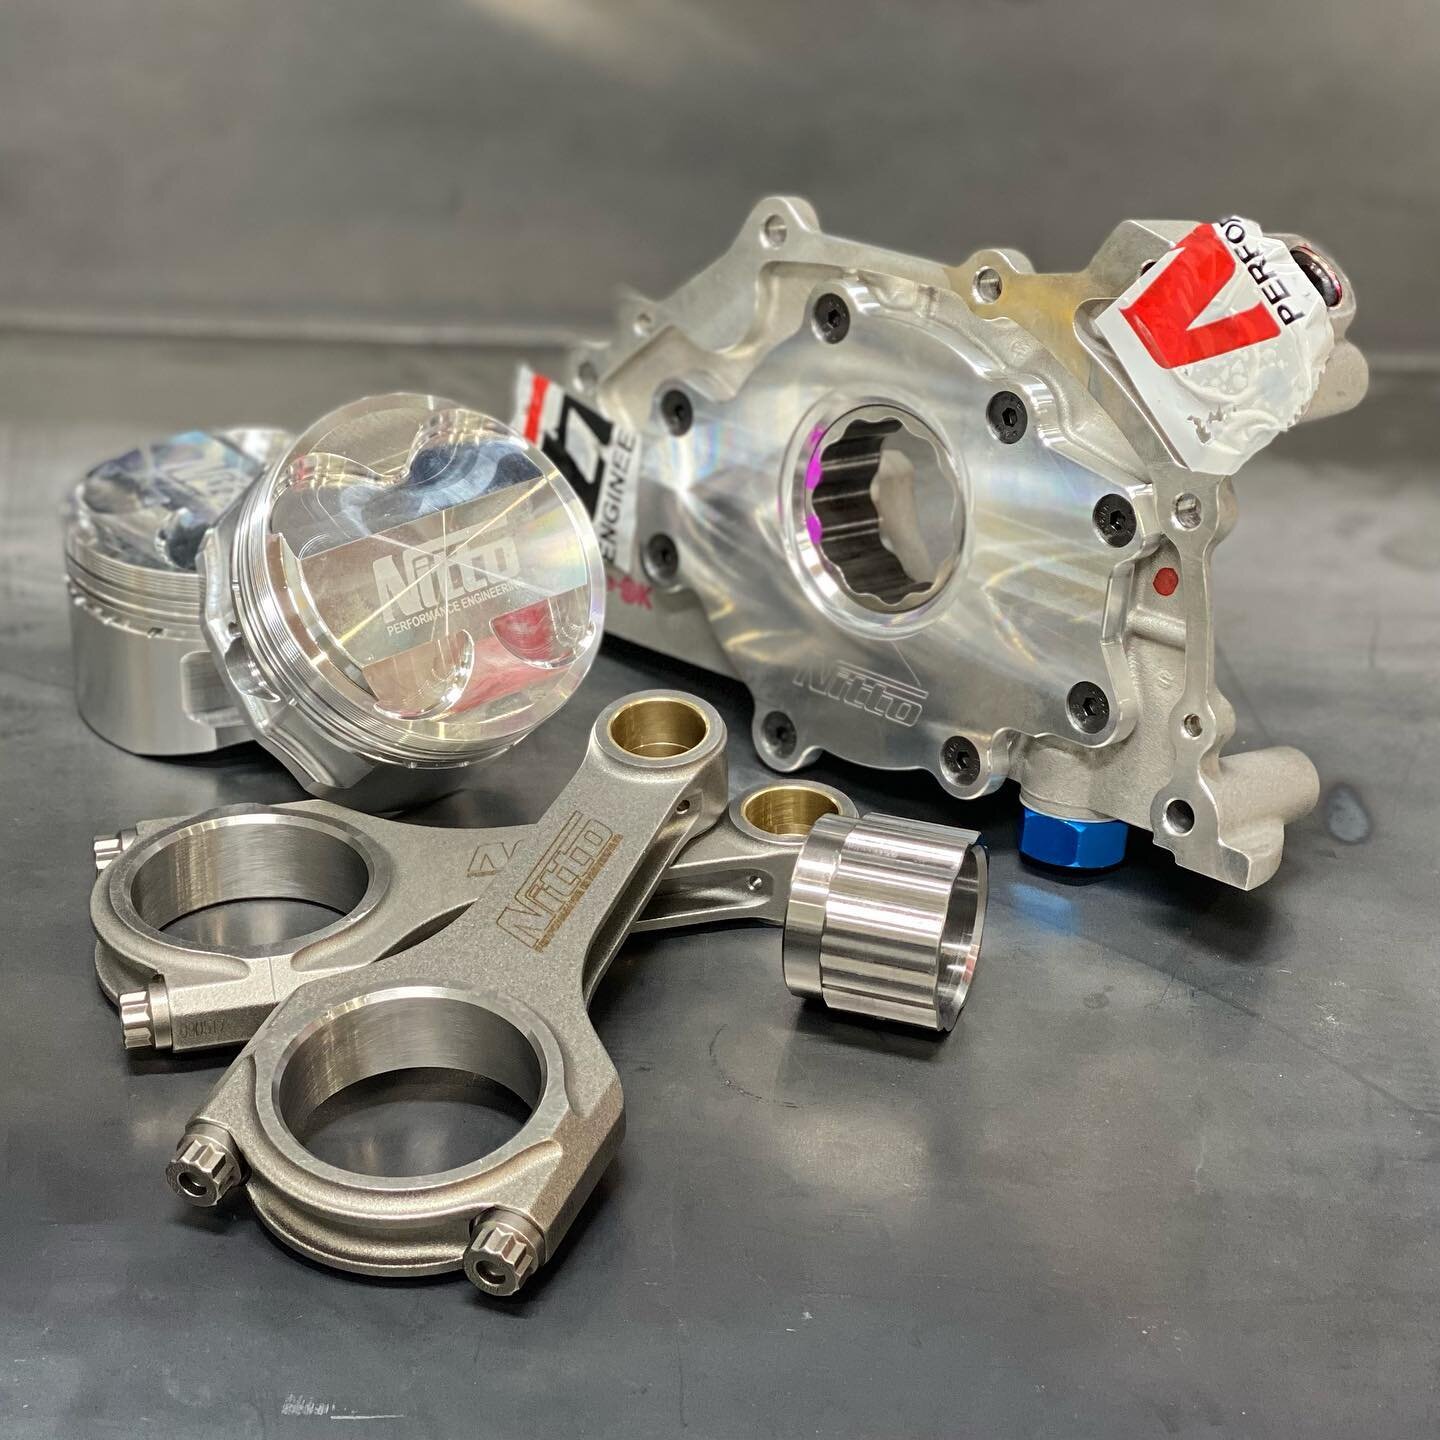 This is what we like to see &mdash; only the good stuff for an upcoming RB25 build! The weak factory crank collar is out, no more oil pump failures! 💥 Supplied by @nittoperformanceengineering @cp_carrillo #carrillo #arp #nitto #nissan #rb25 #rb26 #p